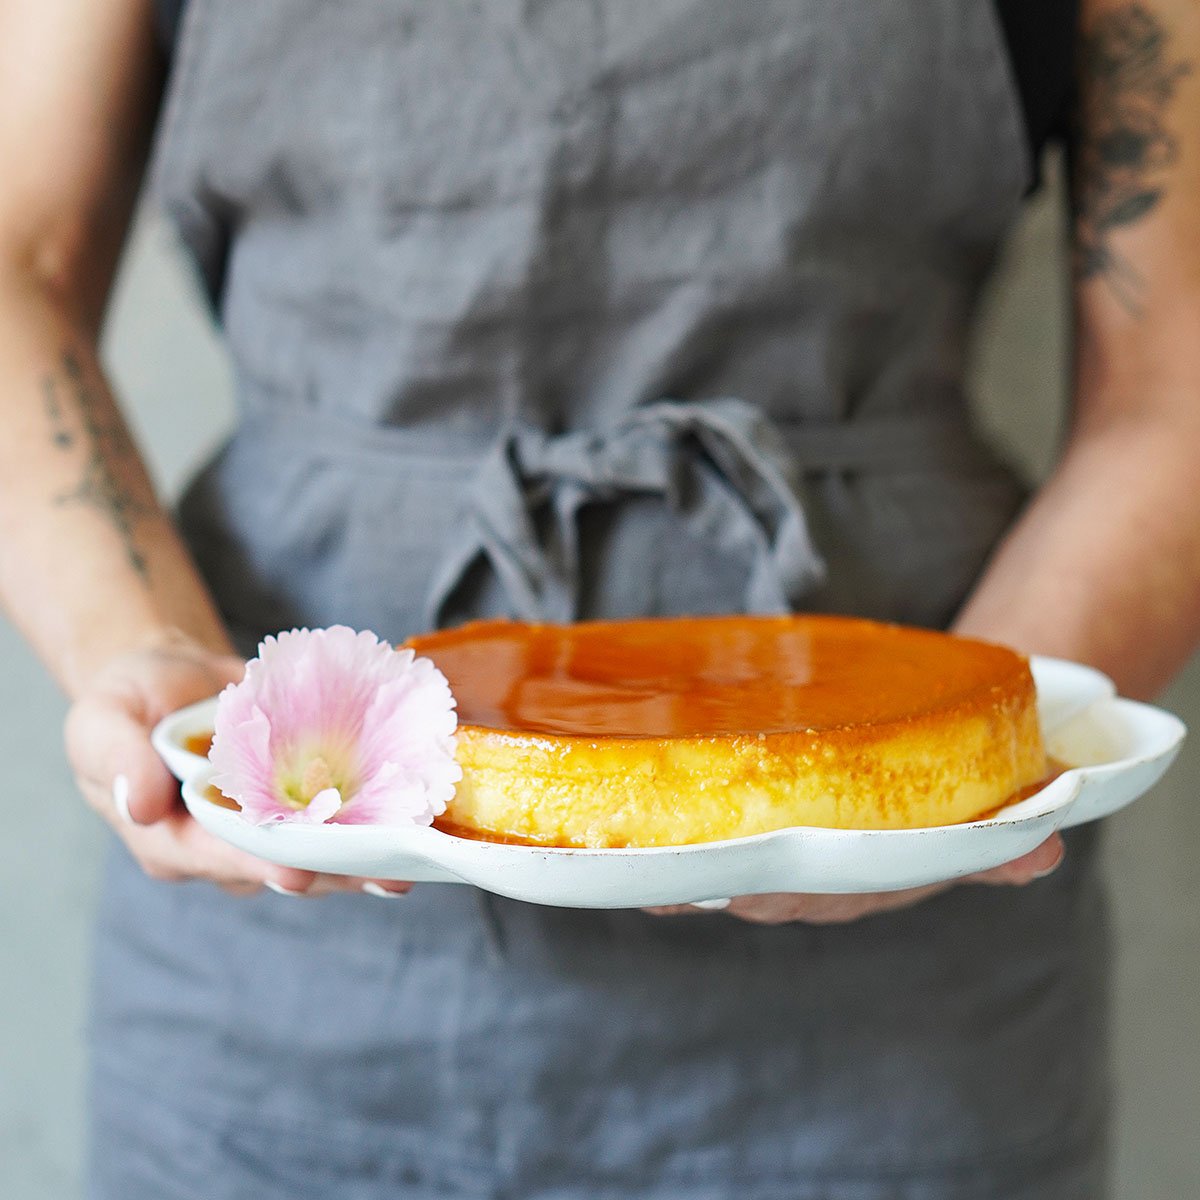 A person holding a flan placed in a serving plate with a pink flower on the side.